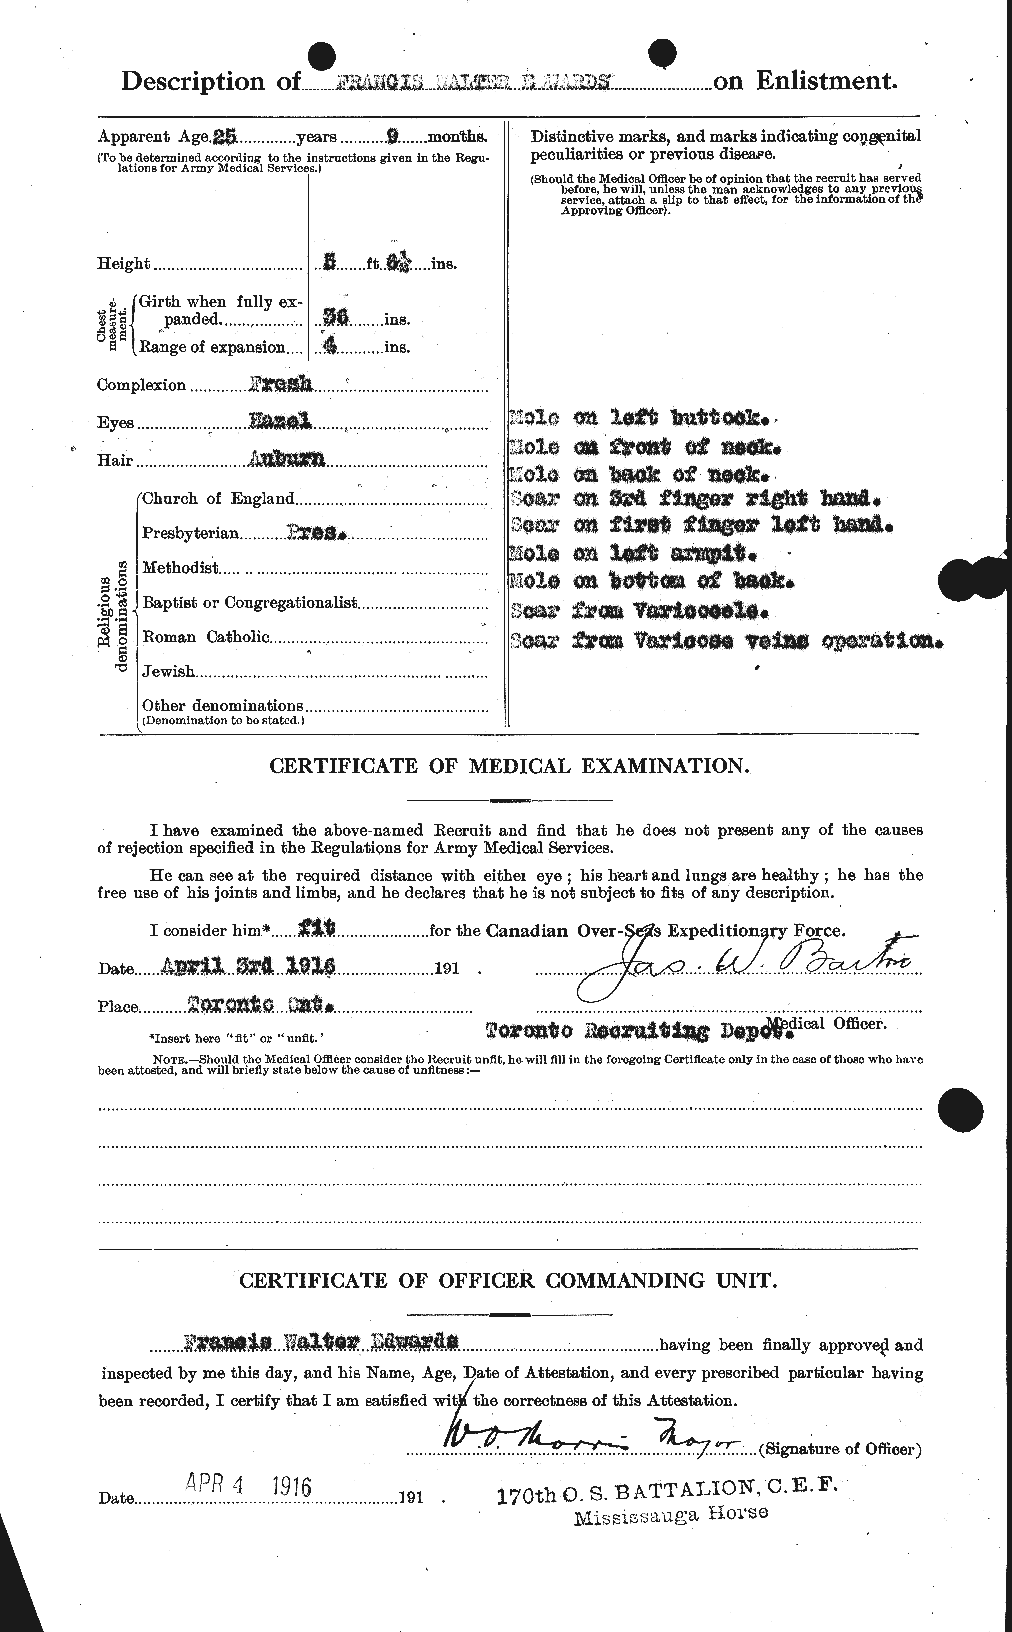 Personnel Records of the First World War - CEF 309037b